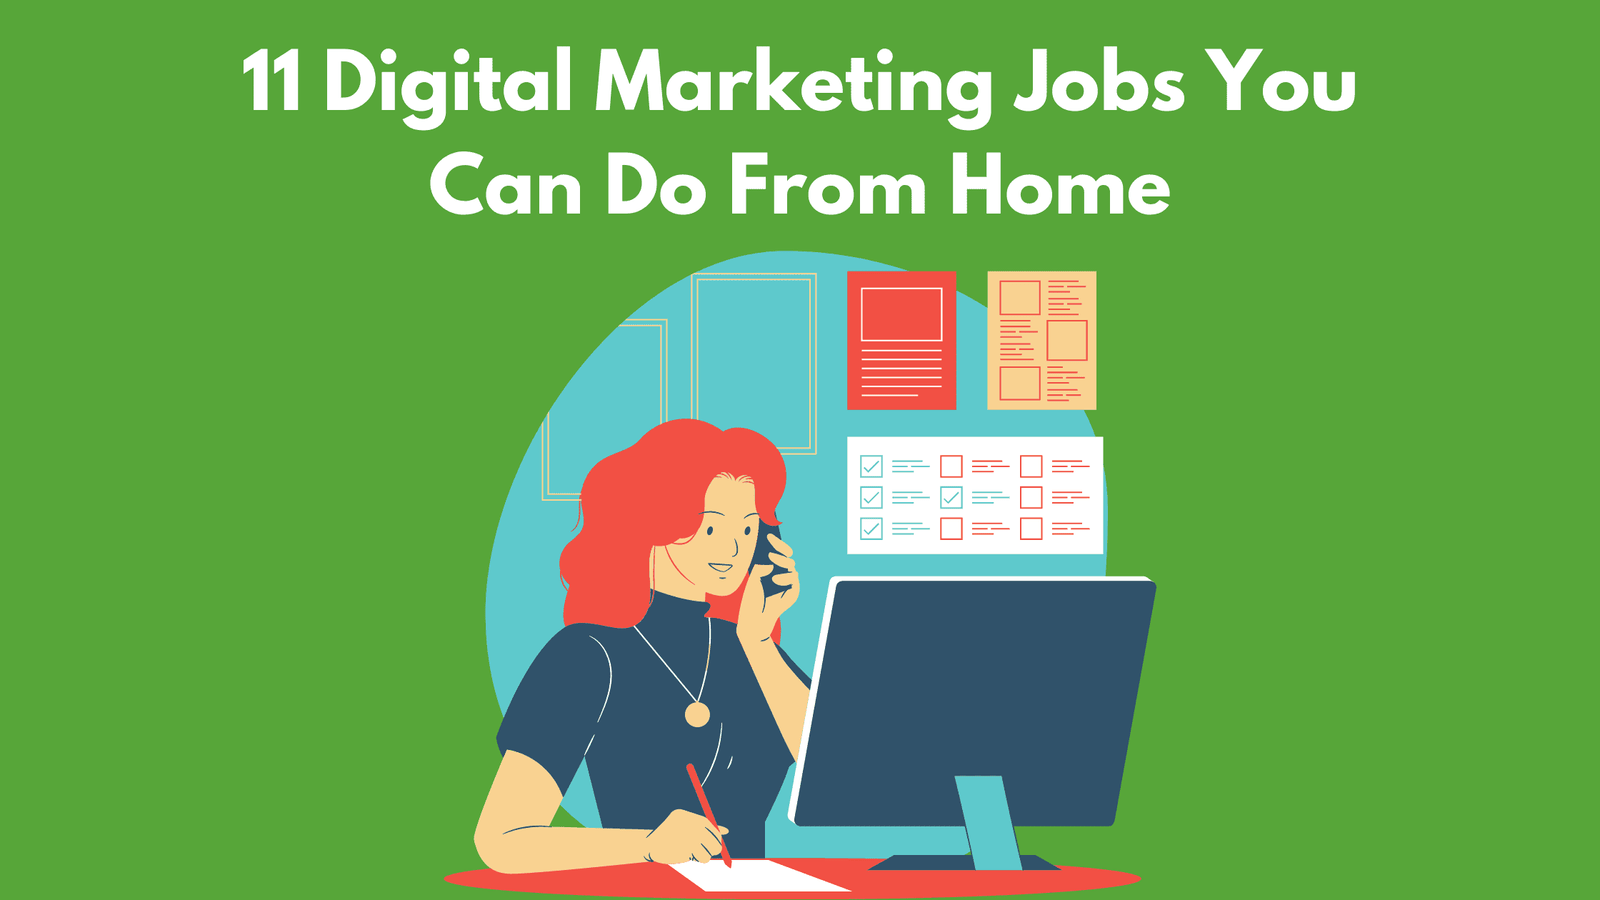 11 Digital Marketing Jobs You Can Do From Home